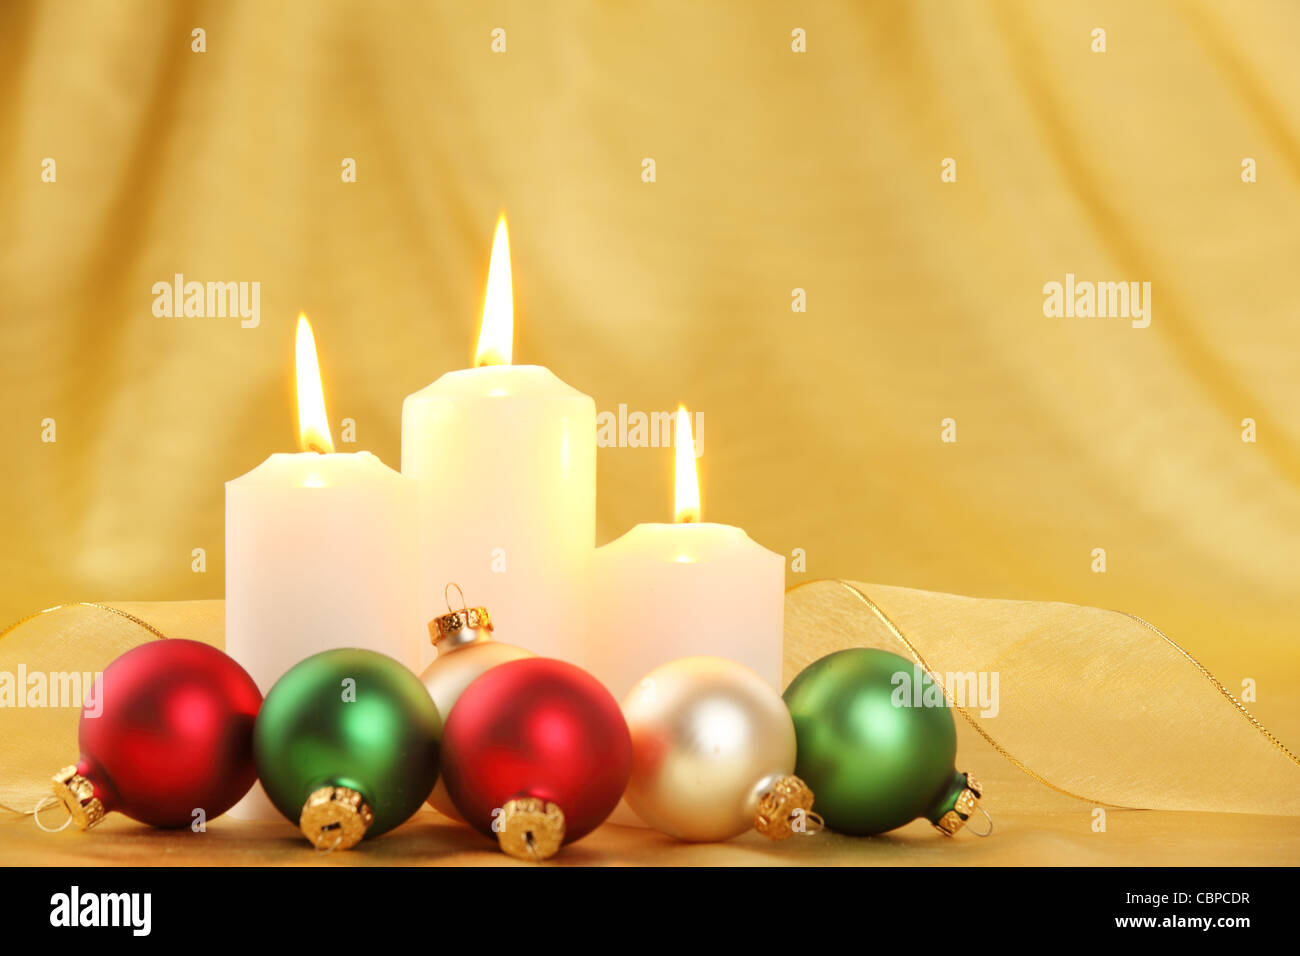 Christmas decoration with candles and balls Stock Photo